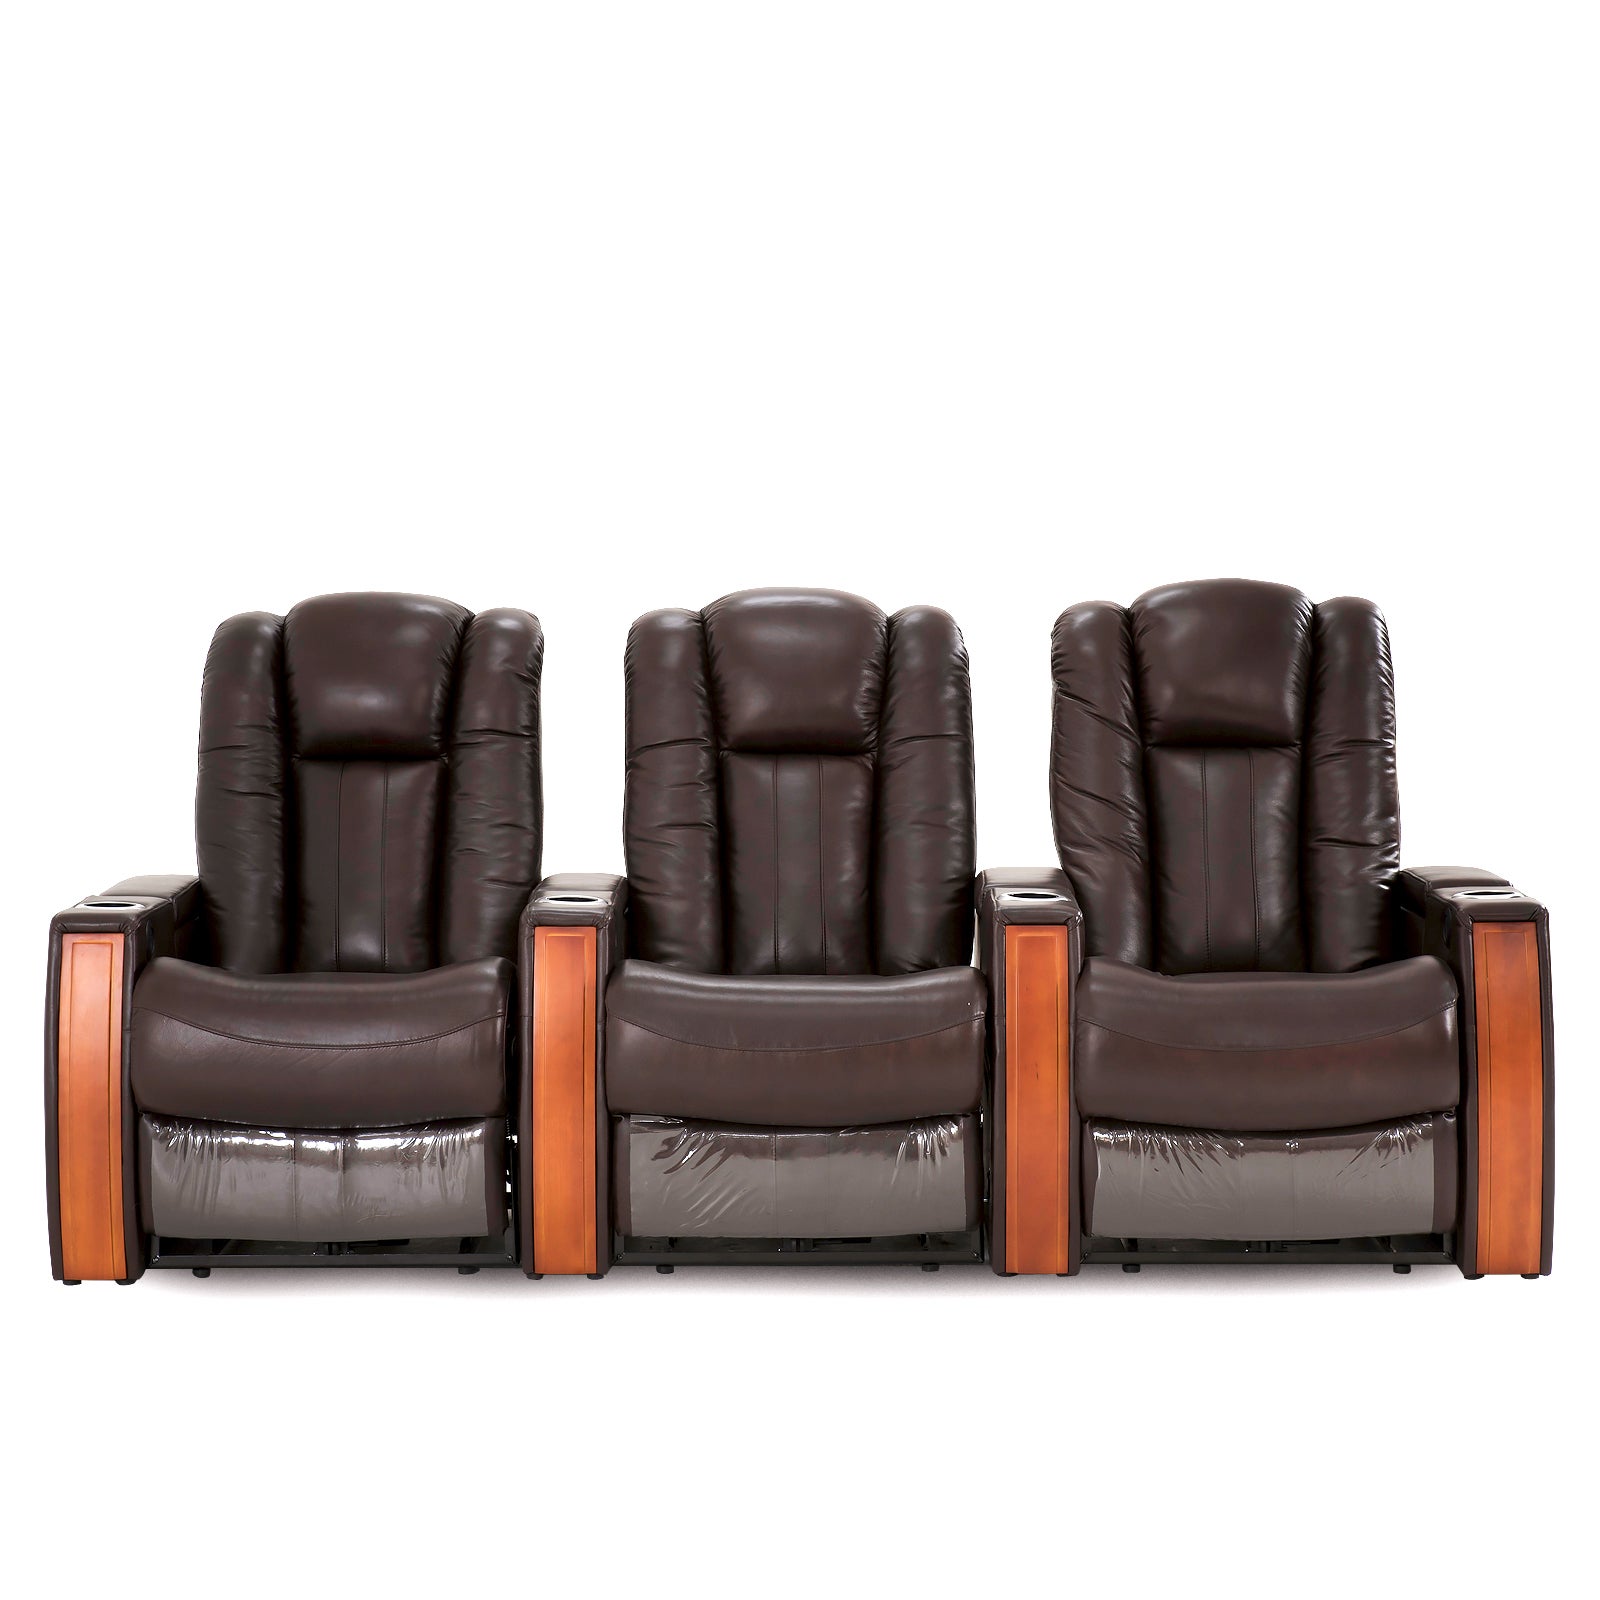 Executive Wide Seat 3 Seater Electric Recliner